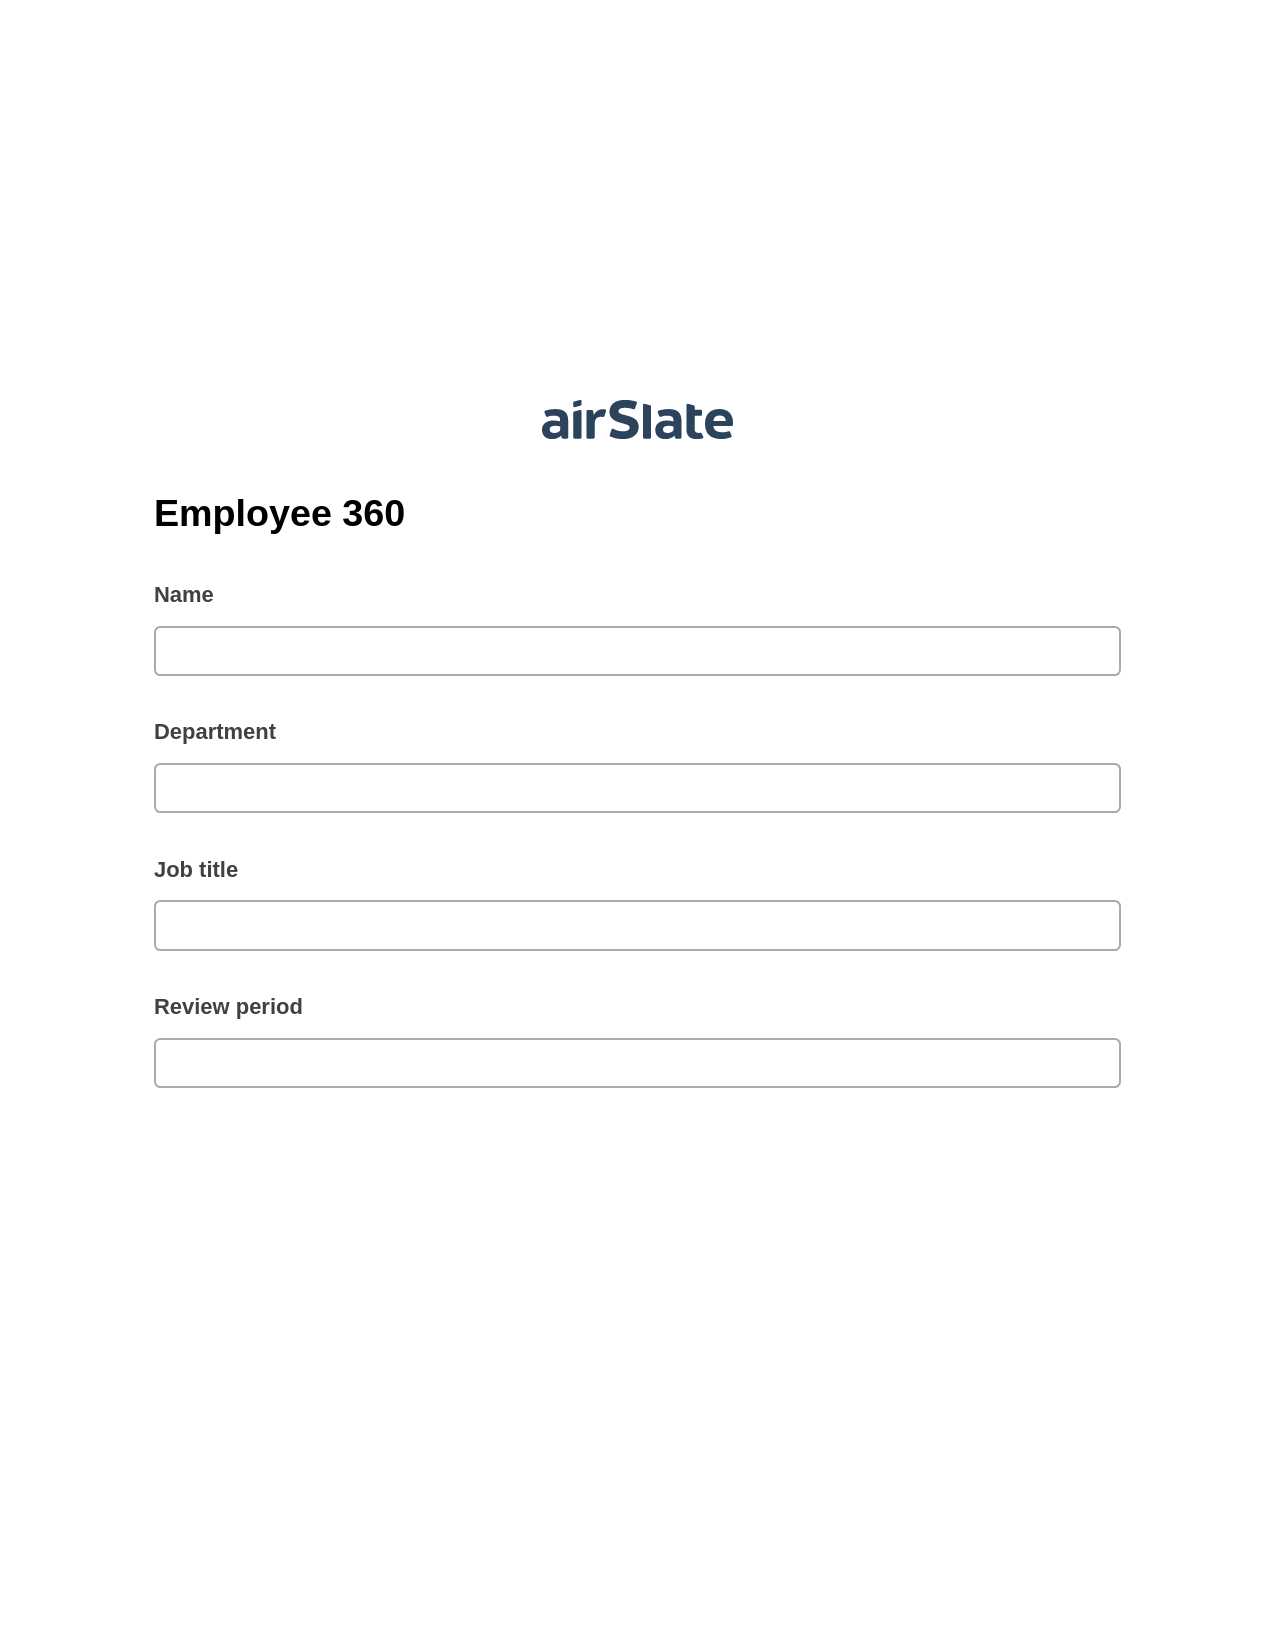 Employee 360 Pre-fill from Excel Spreadsheet Bot, Reminder Bot, Archive to Dropbox Bot